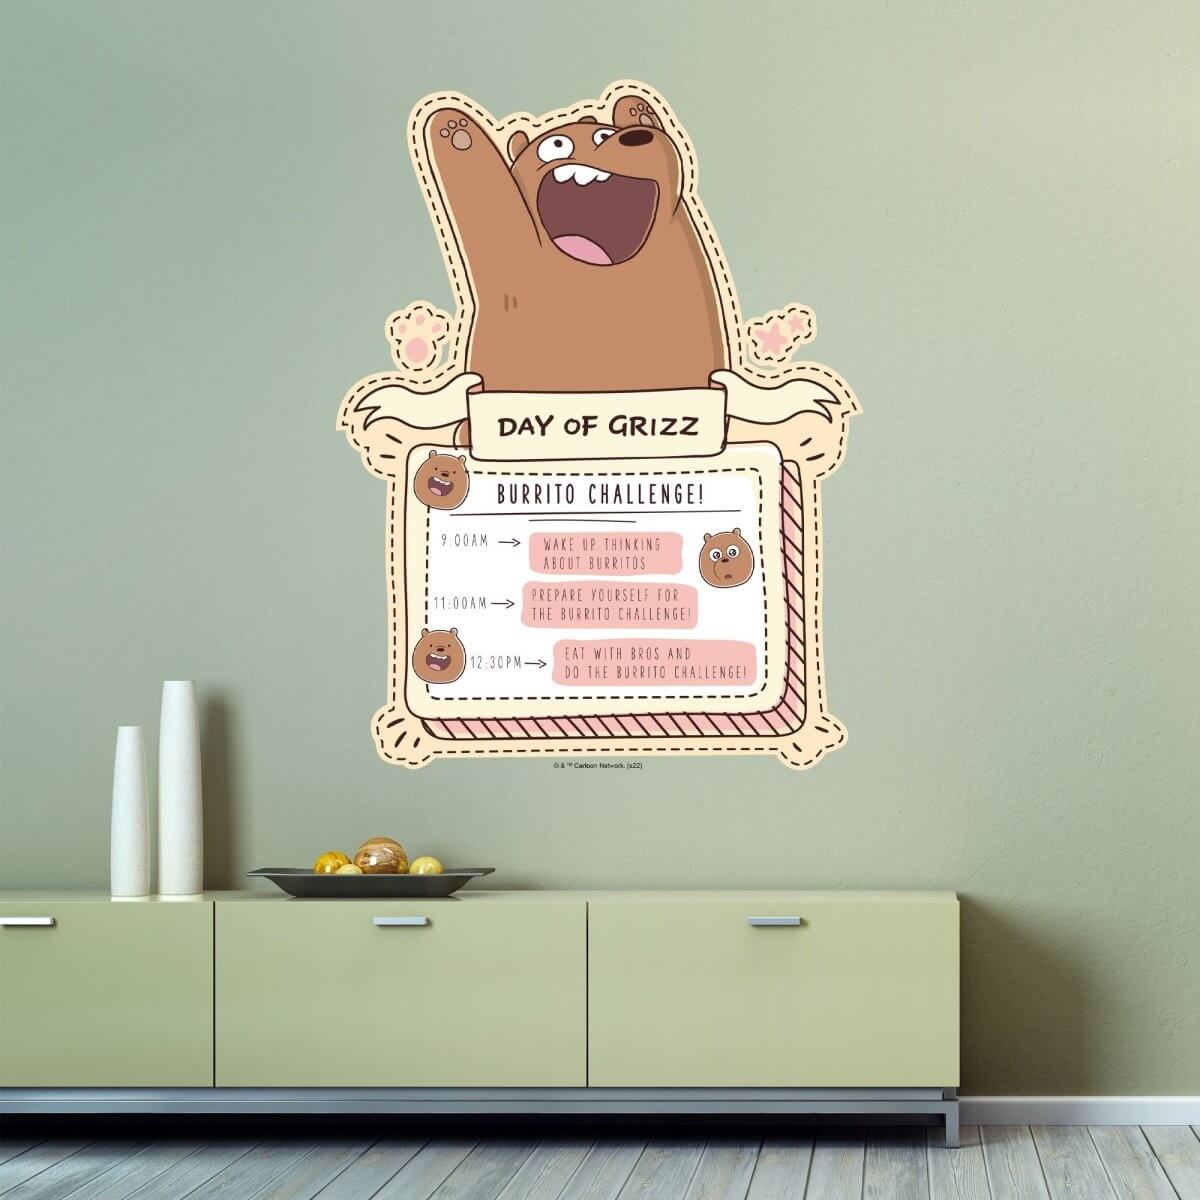 Kismet Decals Home & Room Decor We Bare Bears Grizz's Day Wall decal sticker - officially licensed - latex printed with no solvent odor - Kismet Decals